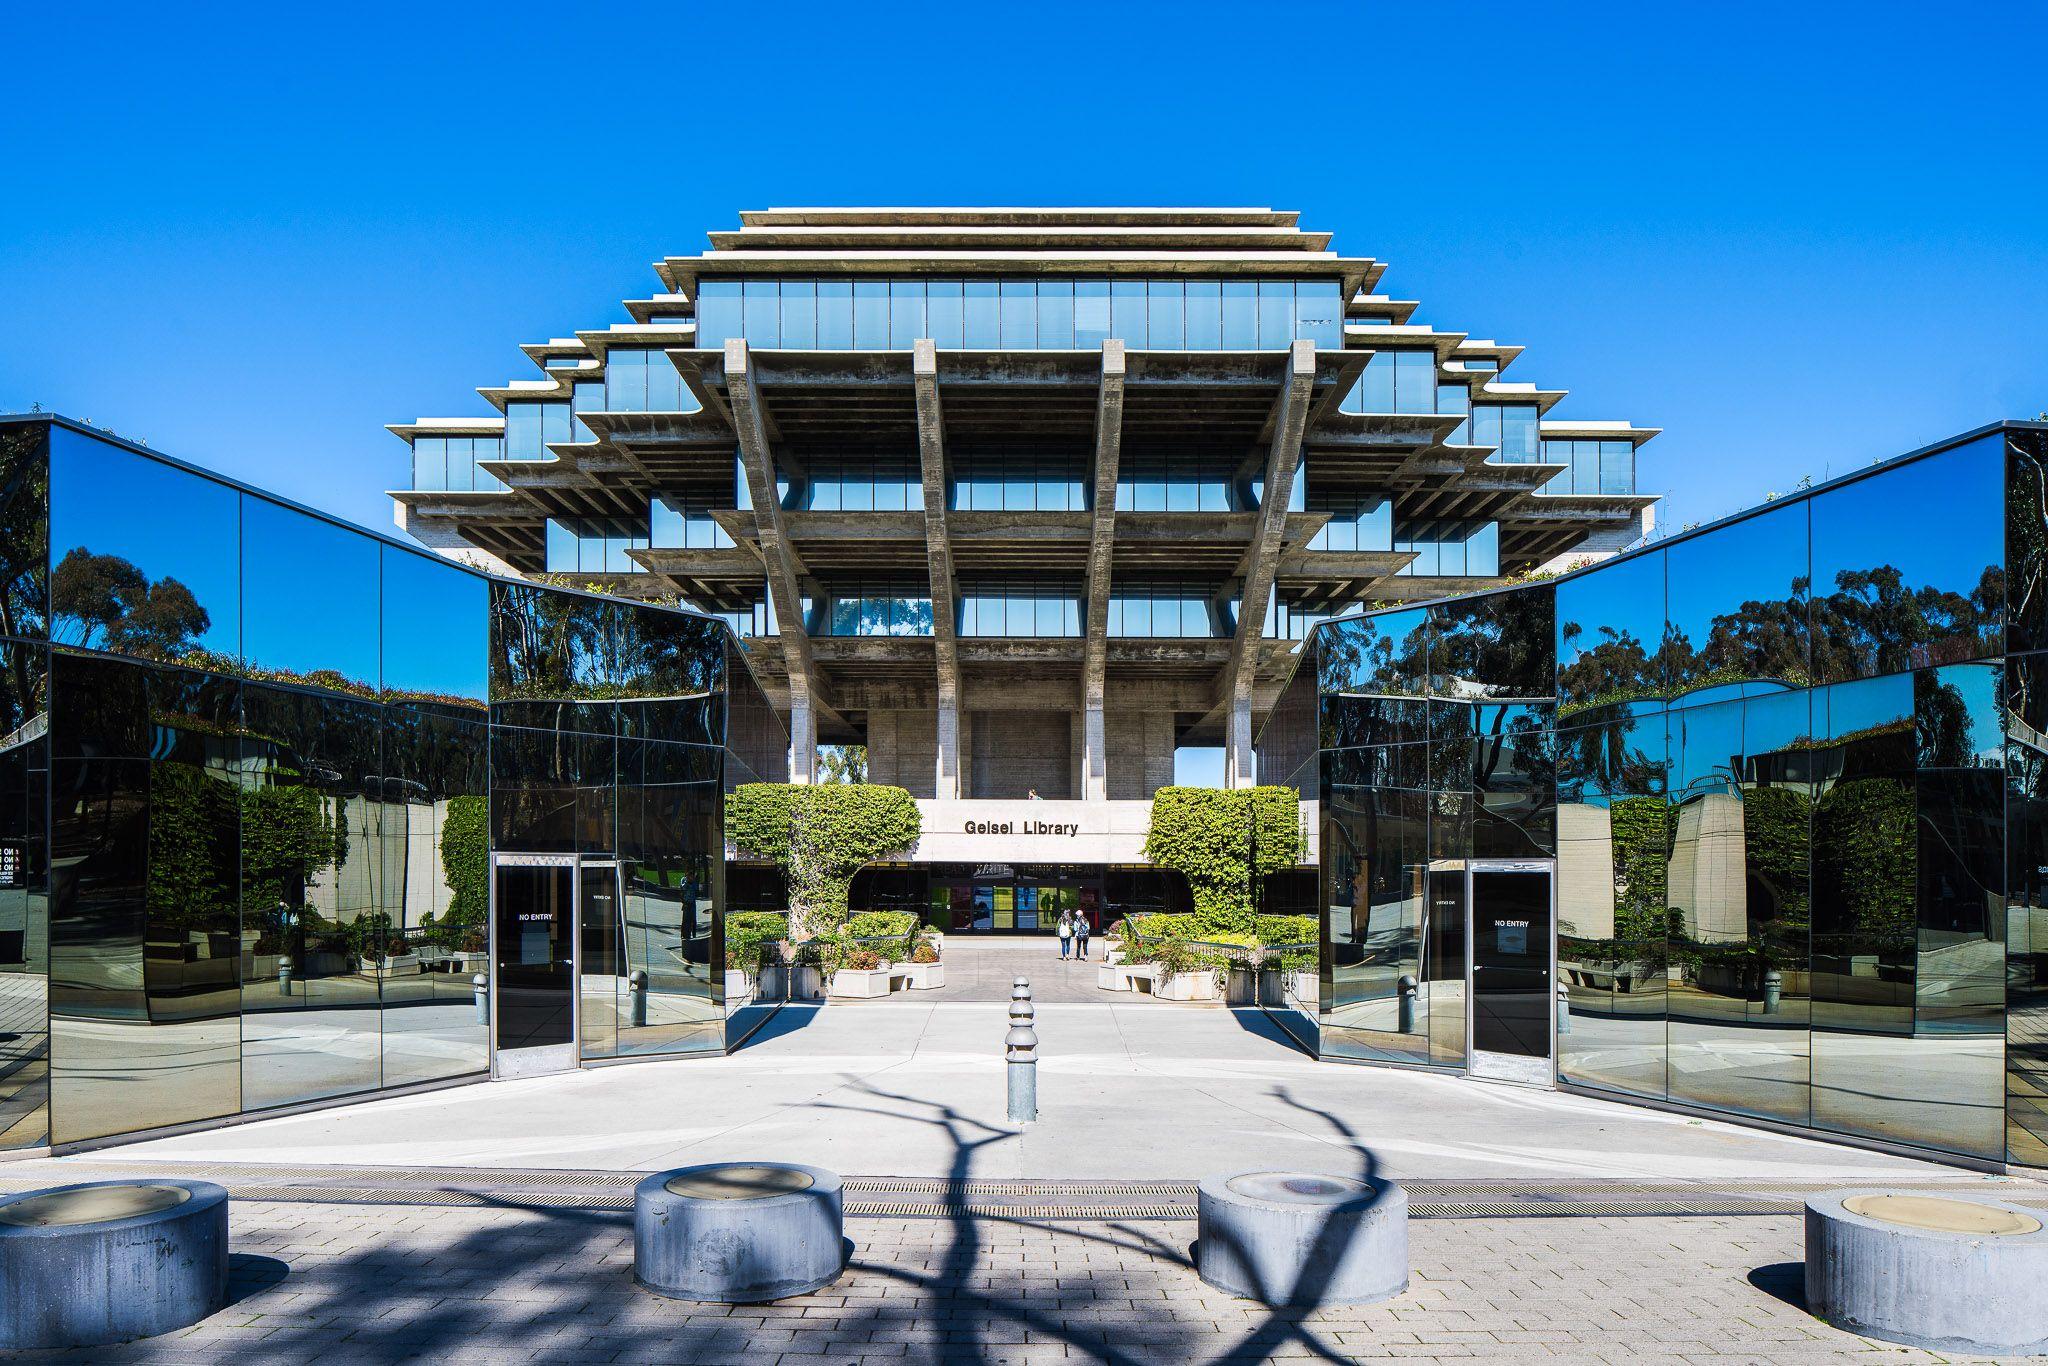 Shooting the Geisel Library in San Diego